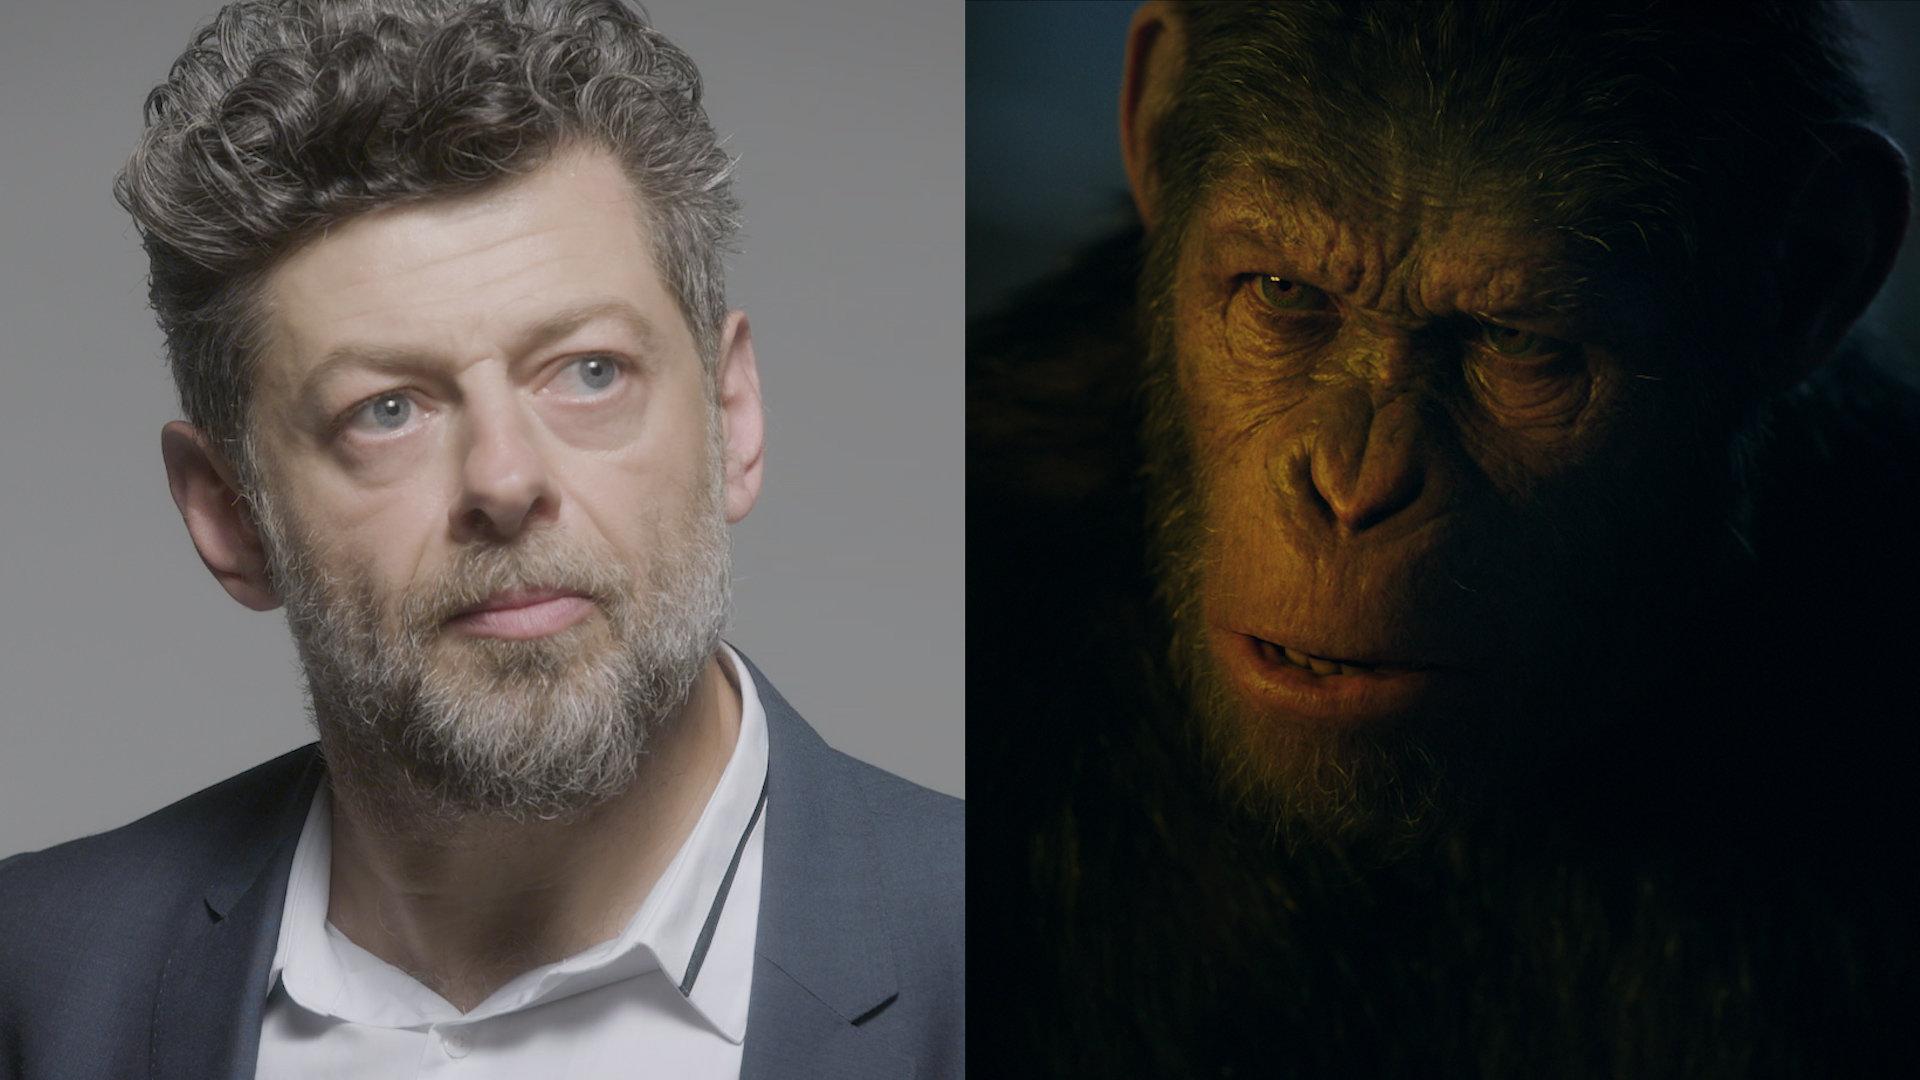 How Andy Serkis Transforms From Human to Ape